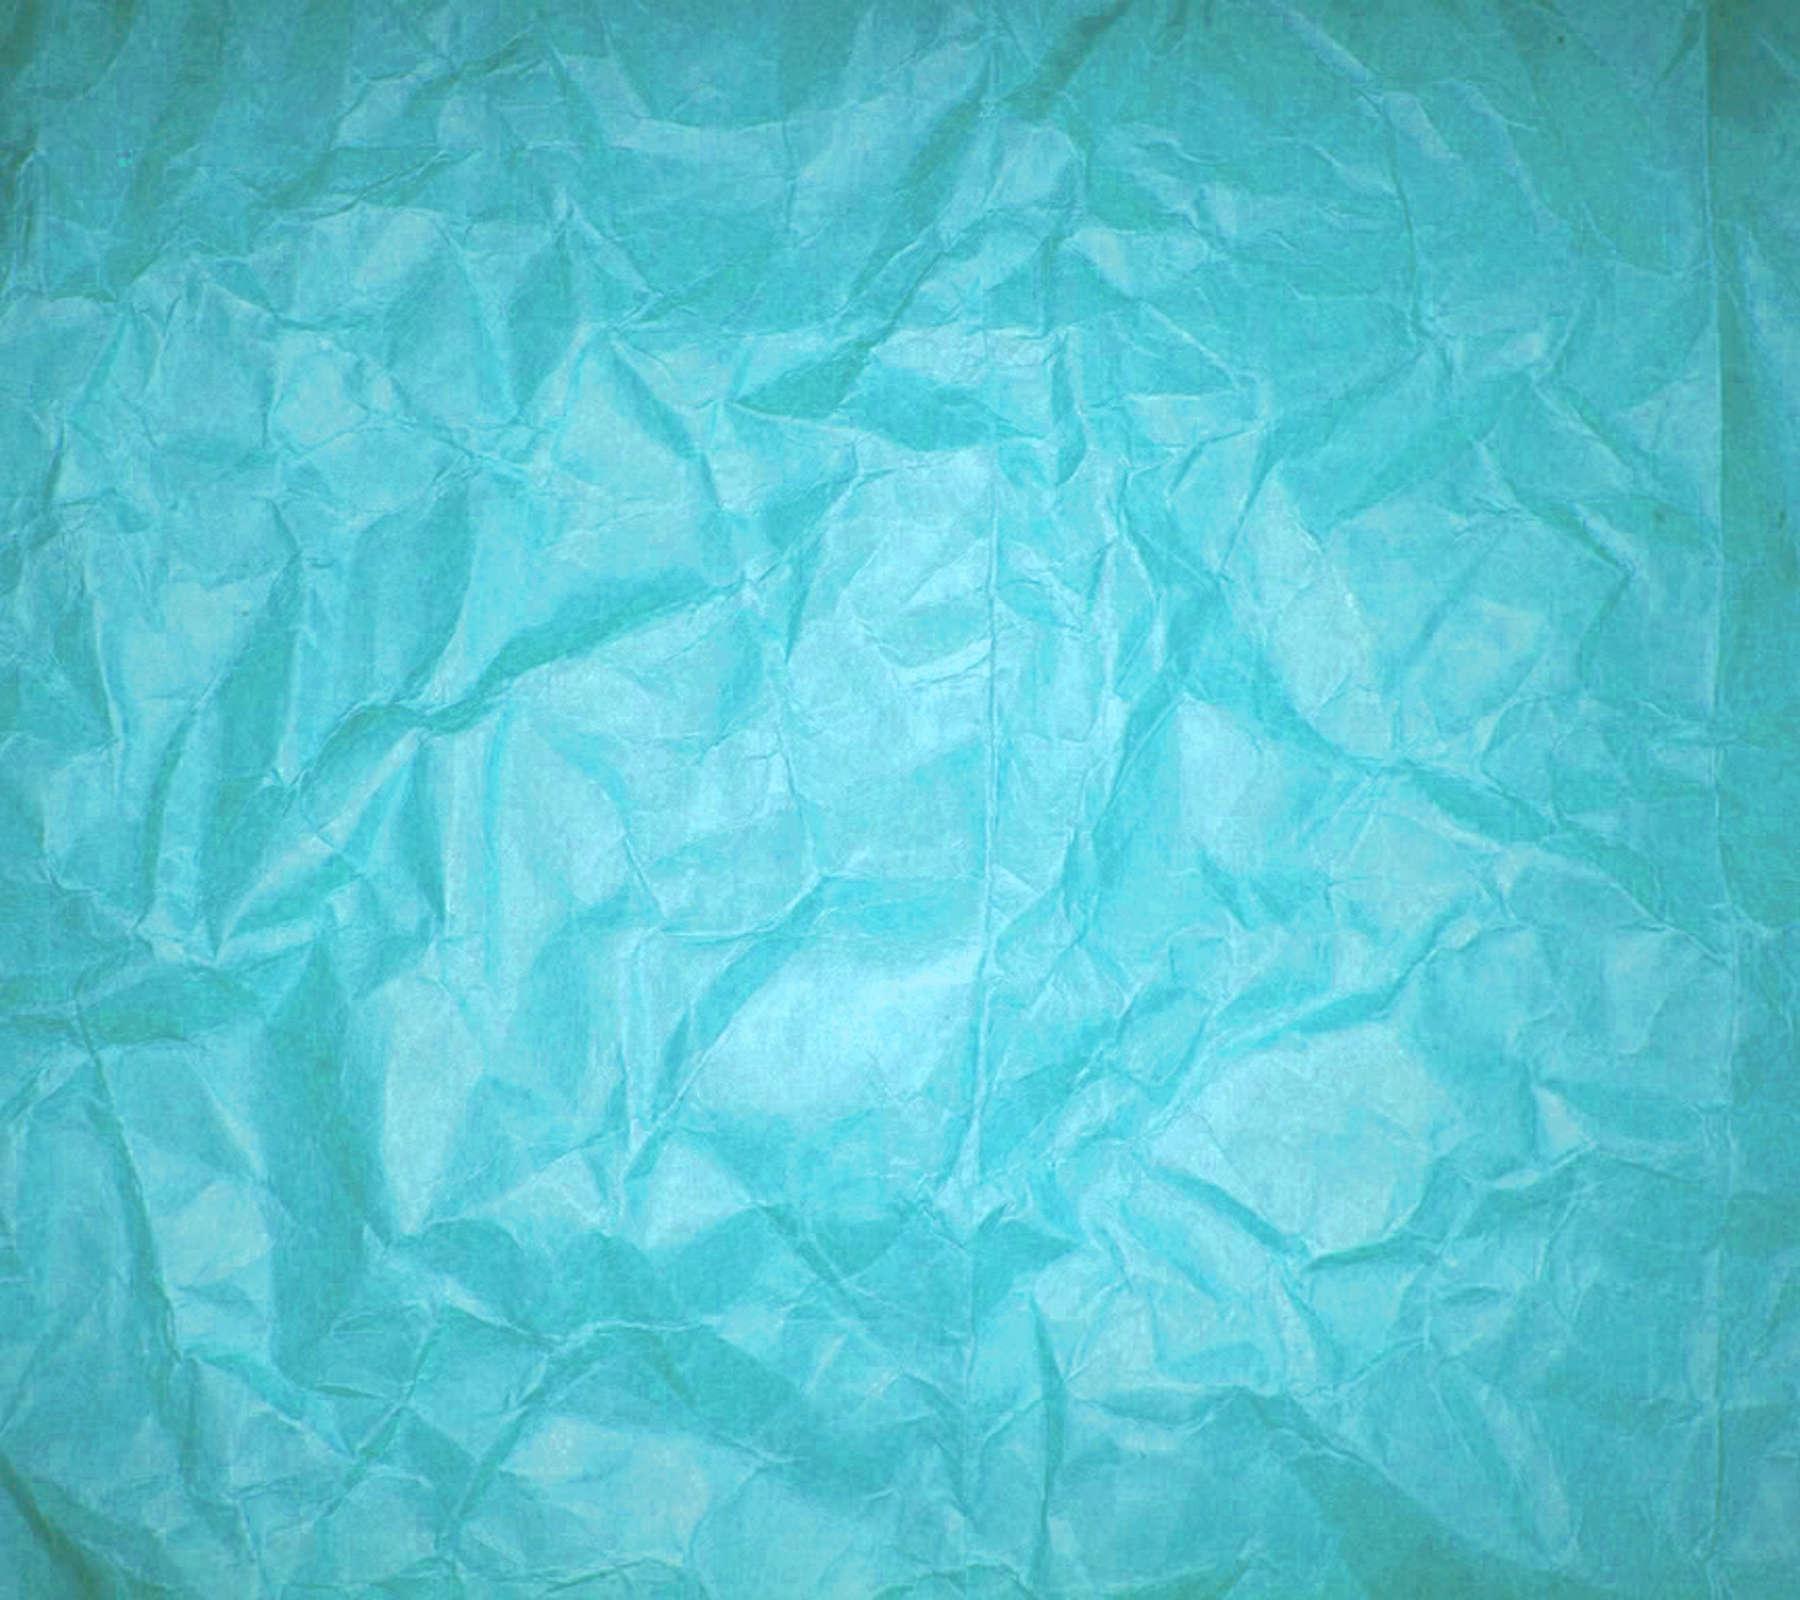 Free Wrinkled Teal Paper Background 1800x1600 Background. Twitter